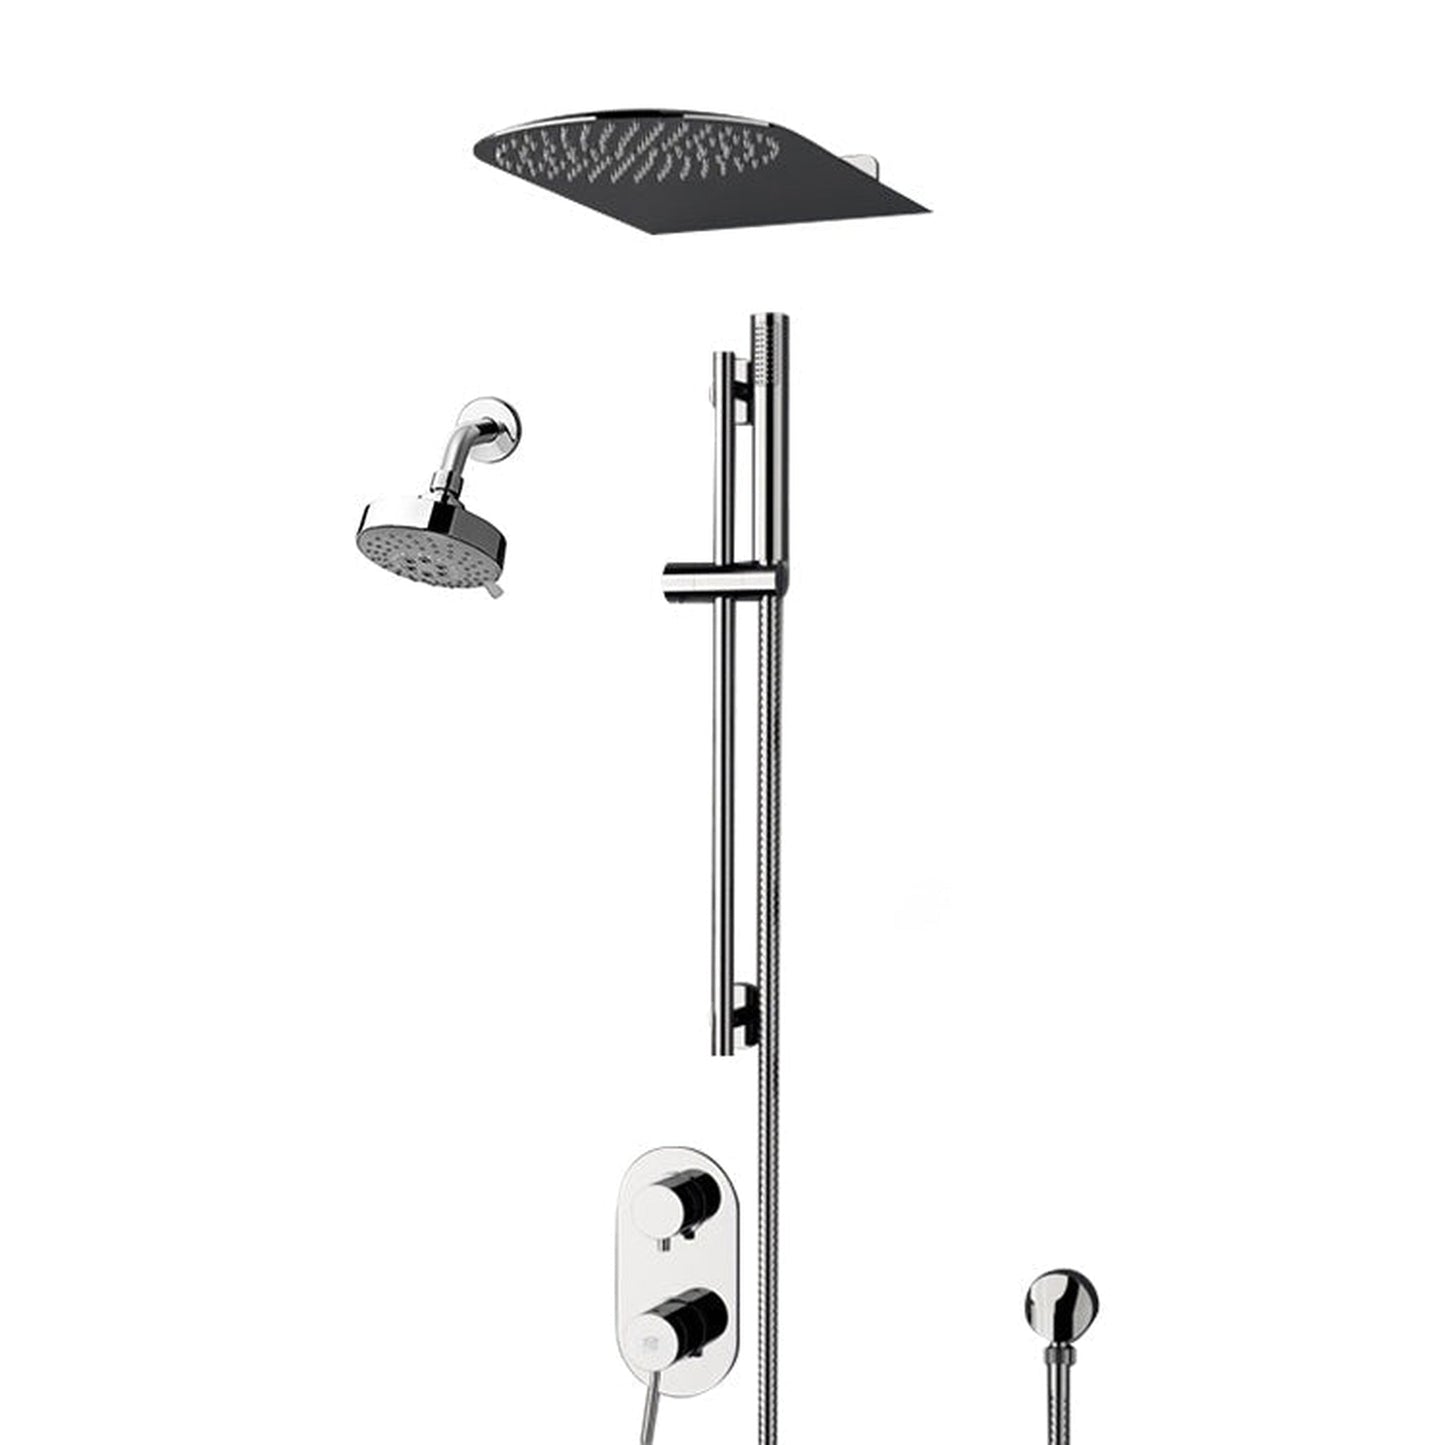 Fontana Deluxe Creative Luxury 10" Chrome Wall-Mounted Dual Shower Head Rainfall Shower System With Hand Shower